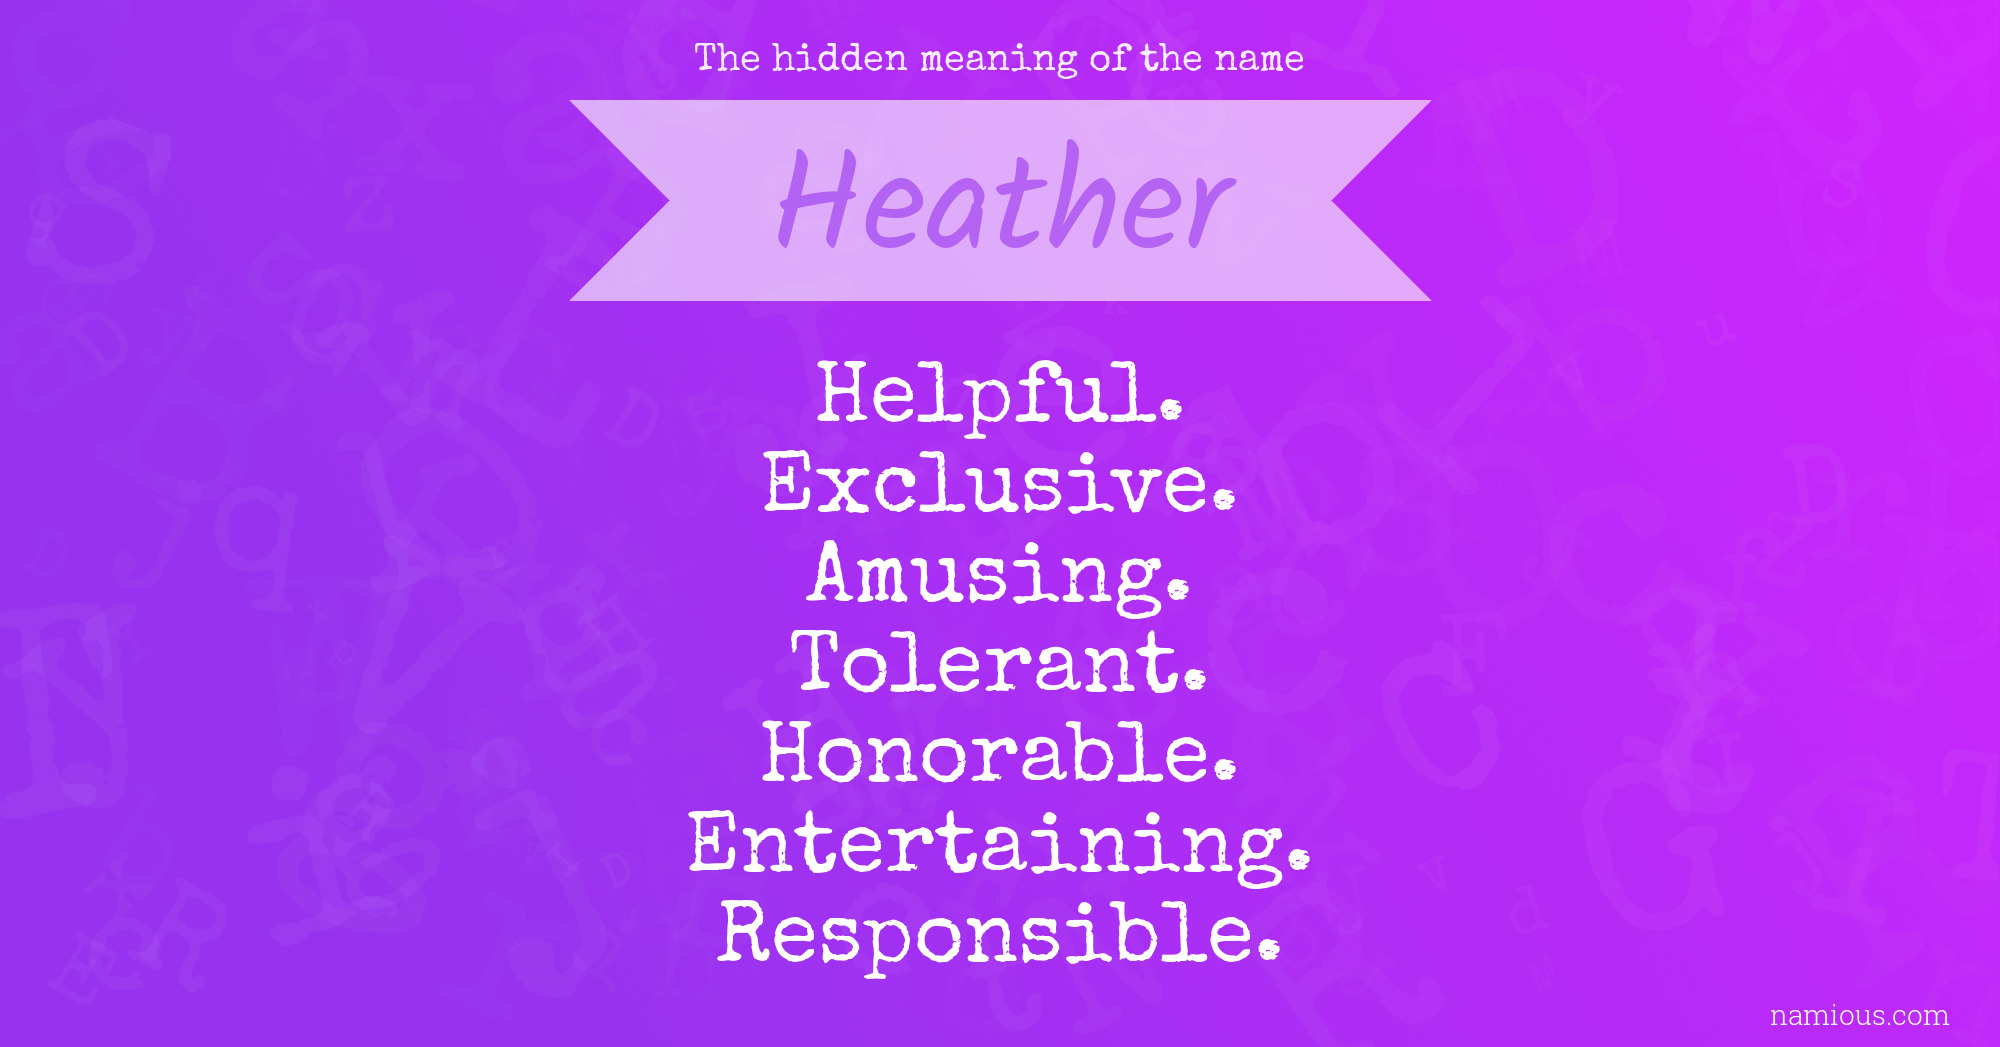 The hidden meaning of the name Heather